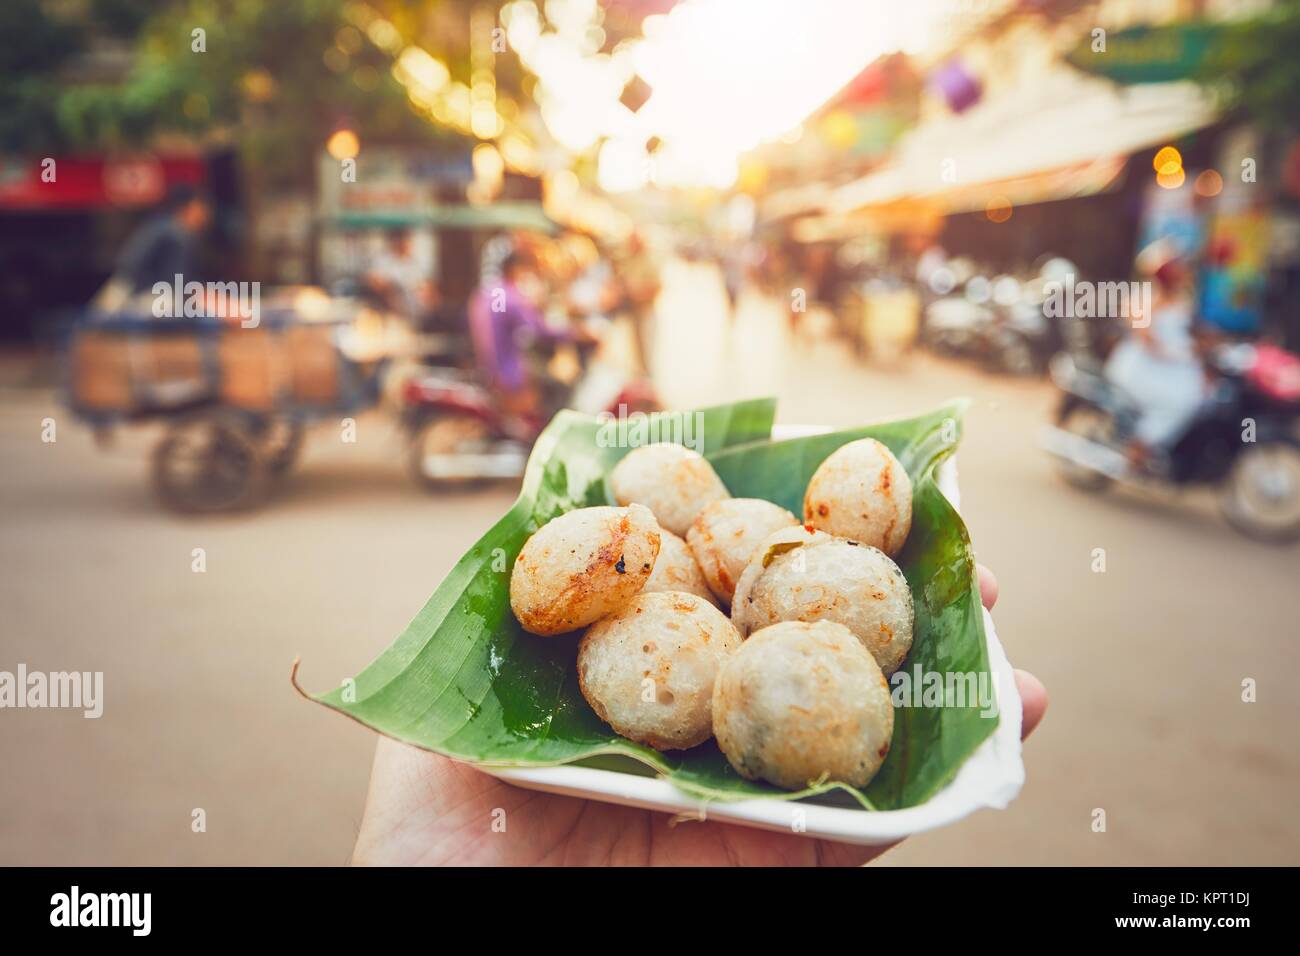 Hand of man holding bowl with sweet coconut food. Busy street full of restaurants, bars and shops - Siem Reap, Cambodia Stock Photo